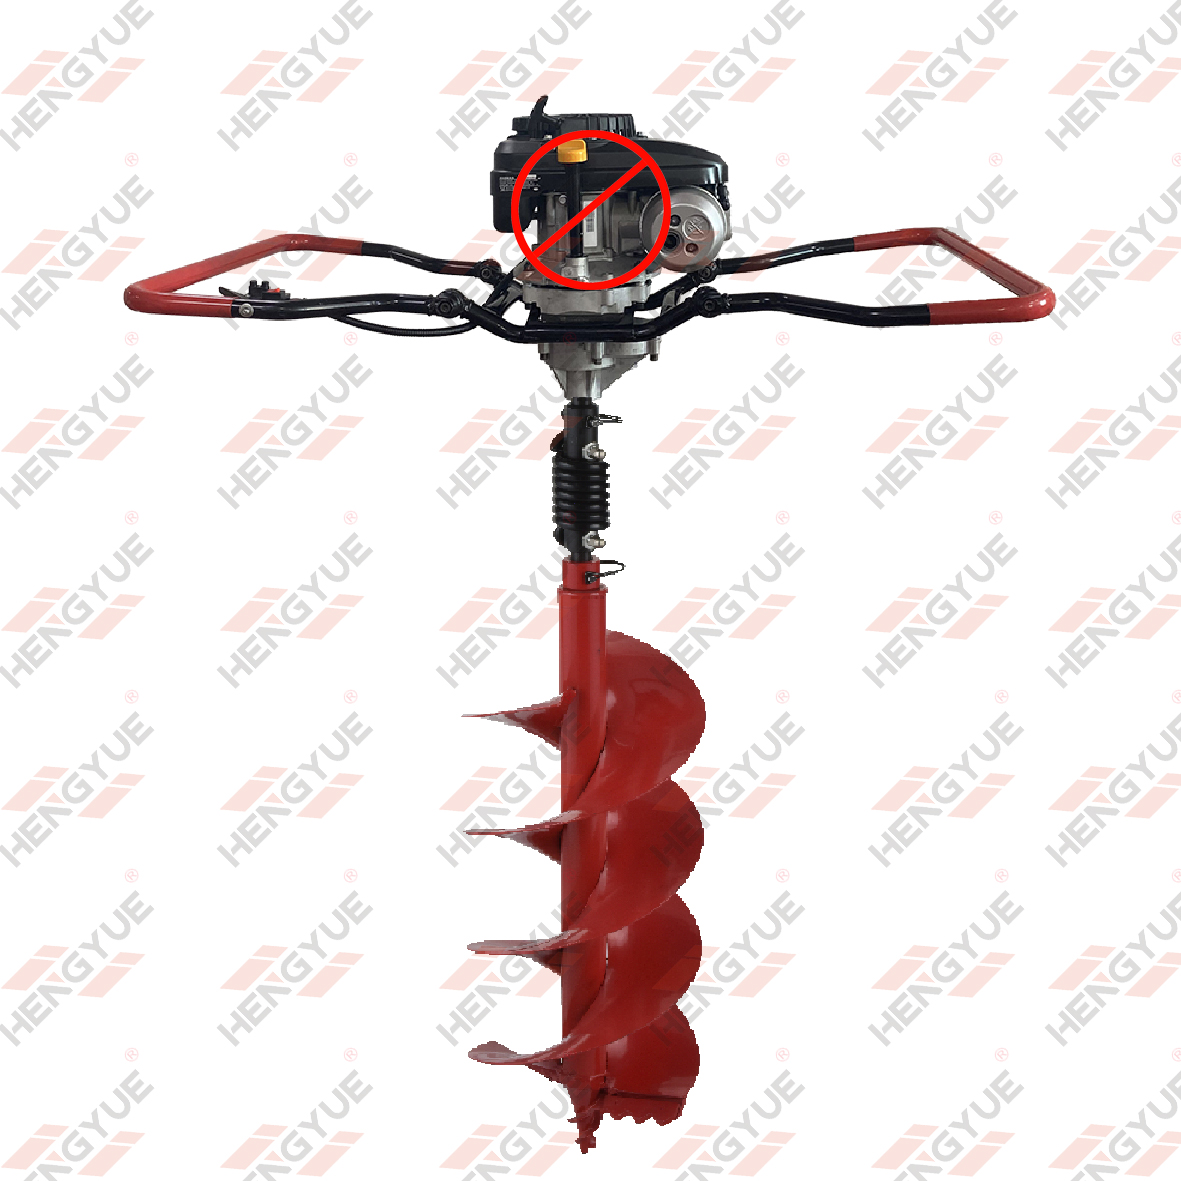 Gear Box for Hand Held 4 Stroke Engine Power Earth Auger Machine 